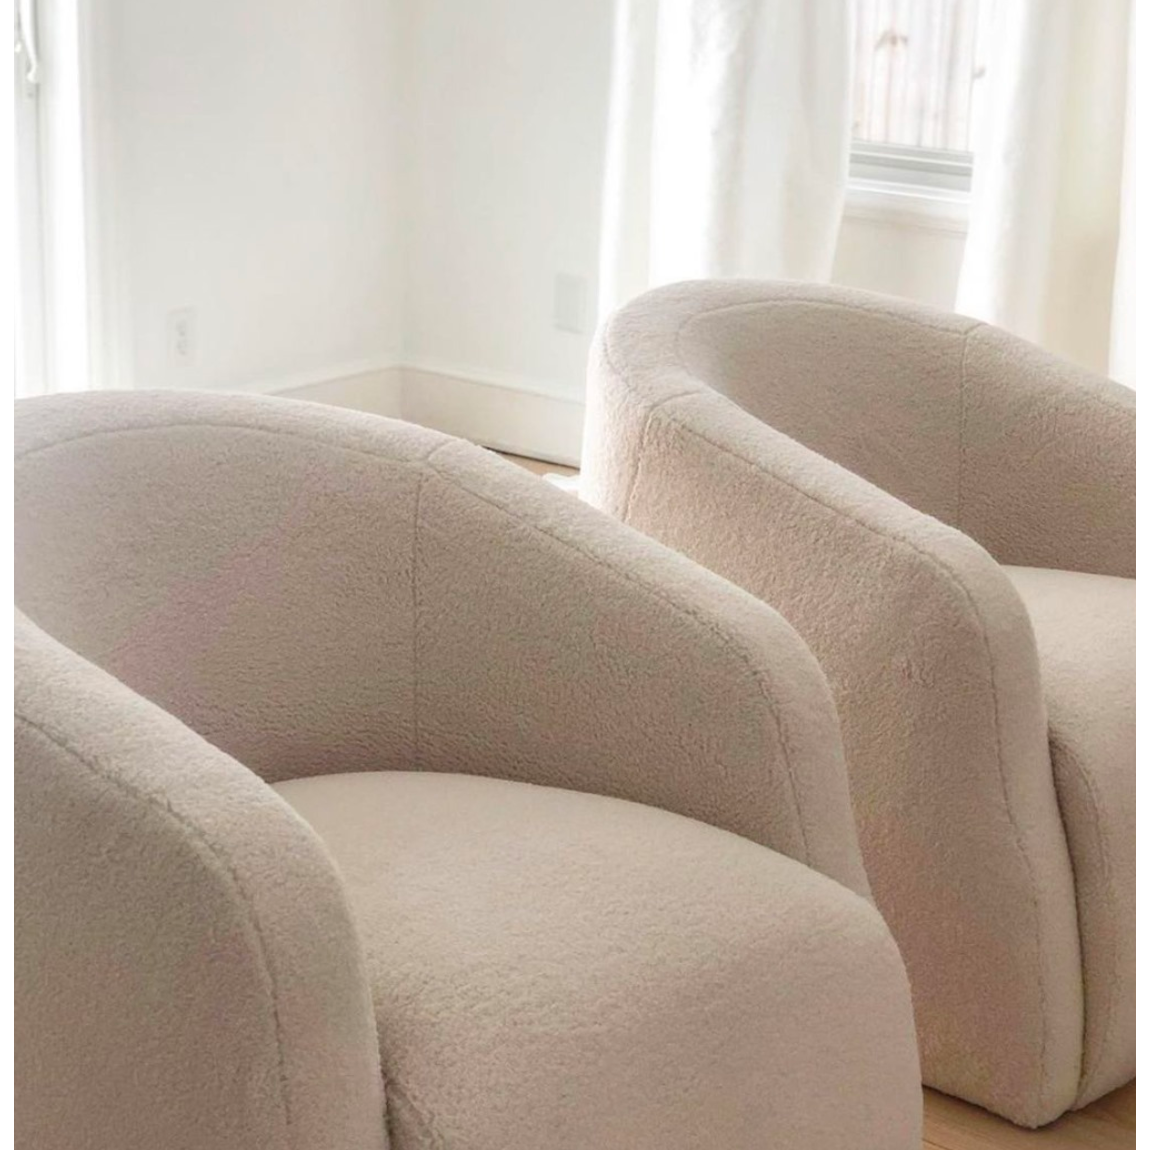 We love the comfortable way your arms just relax on the thoughtful curves of this Theo Club Chair by Verellen furniture!  As shown in our favorite cozy fabric.